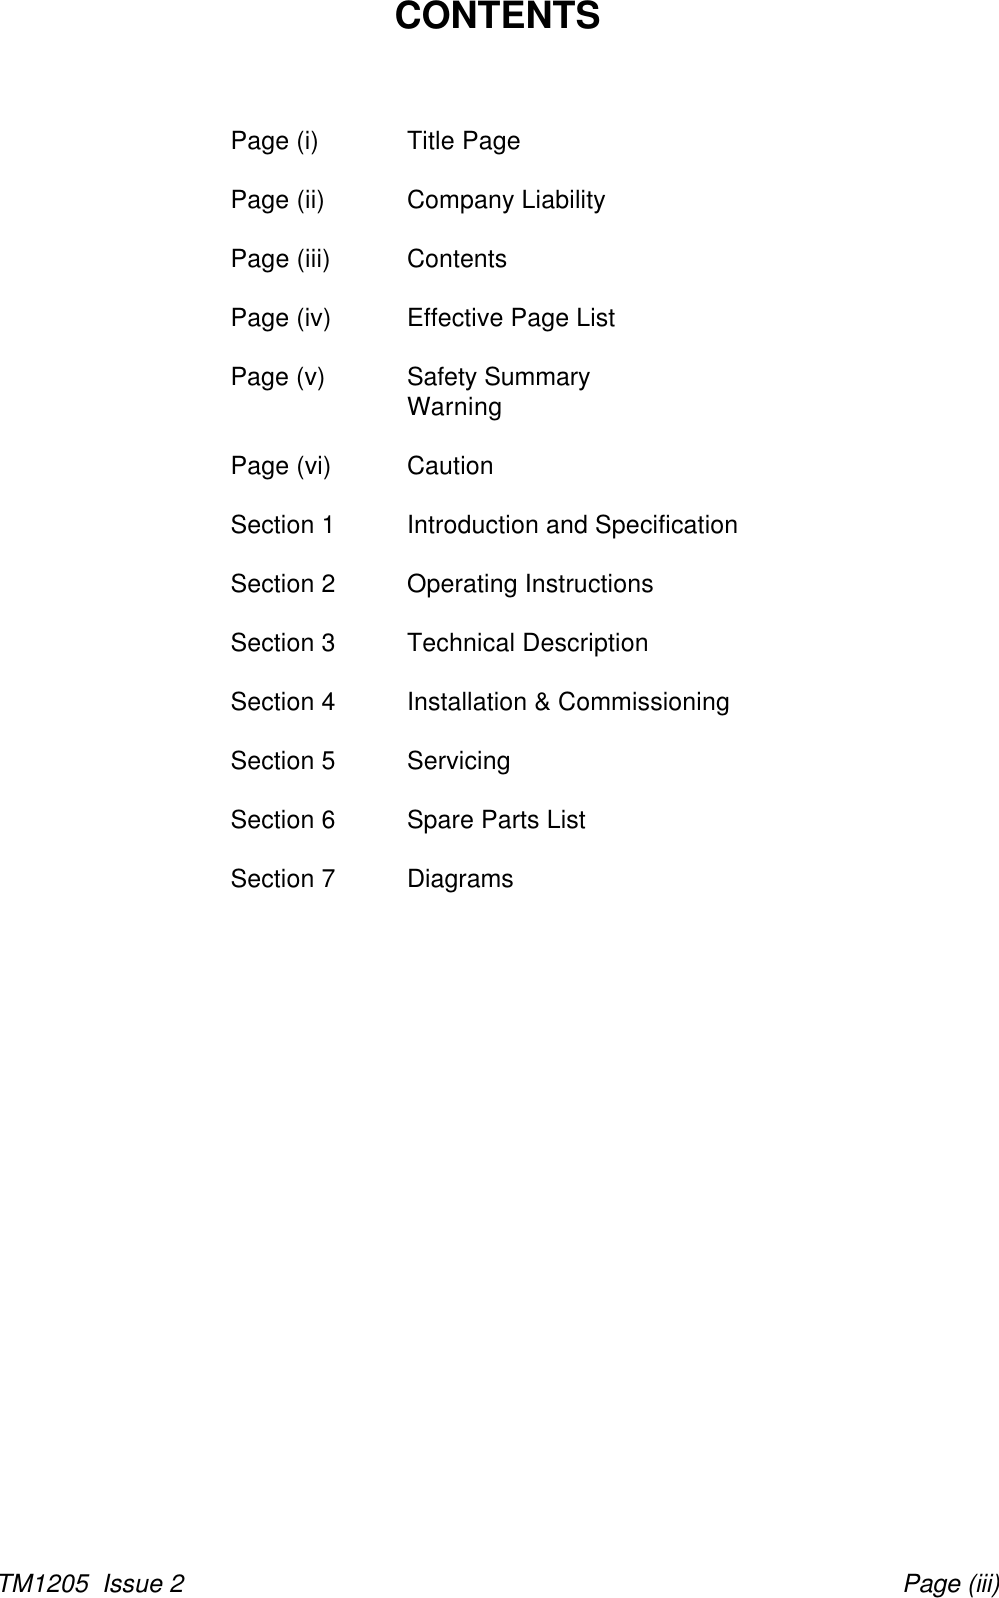 TM1205  Issue 2 Page (iii)CONTENTSPage (i) Title PagePage (ii) Company LiabilityPage (iii) ContentsPage (iv) Effective Page ListPage (v) Safety SummaryWarningPage (vi) CautionSection 1 Introduction and SpecificationSection 2 Operating InstructionsSection 3 Technical DescriptionSection 4 Installation &amp; CommissioningSection 5 ServicingSection 6 Spare Parts ListSection 7 Diagrams